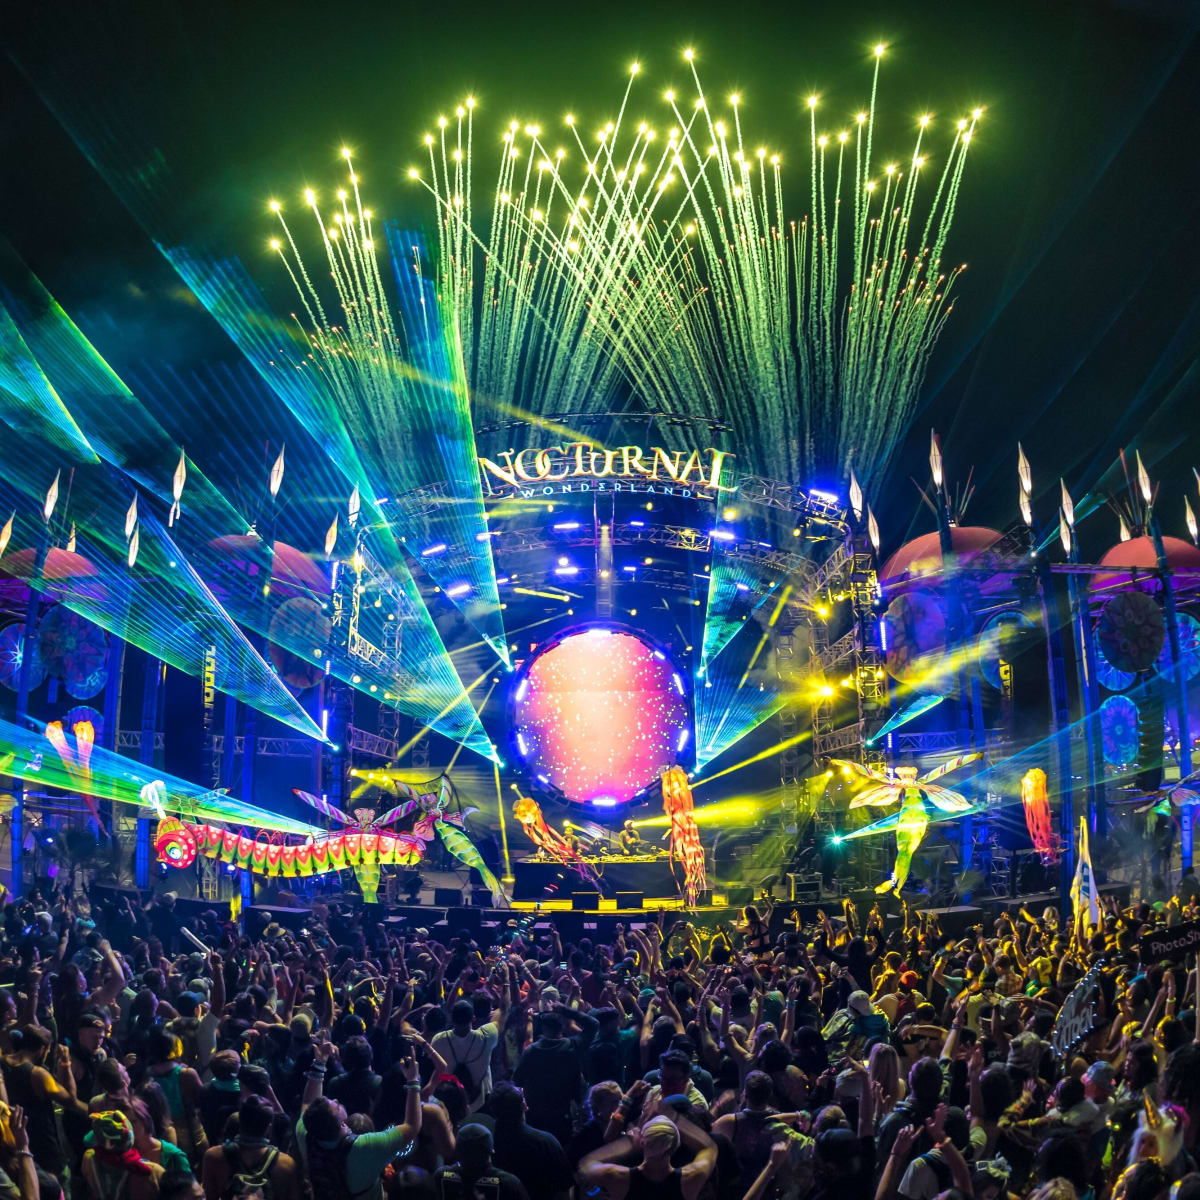 More Artists Announced for Nocturnal Wonderland 2019 Lineup - EDM